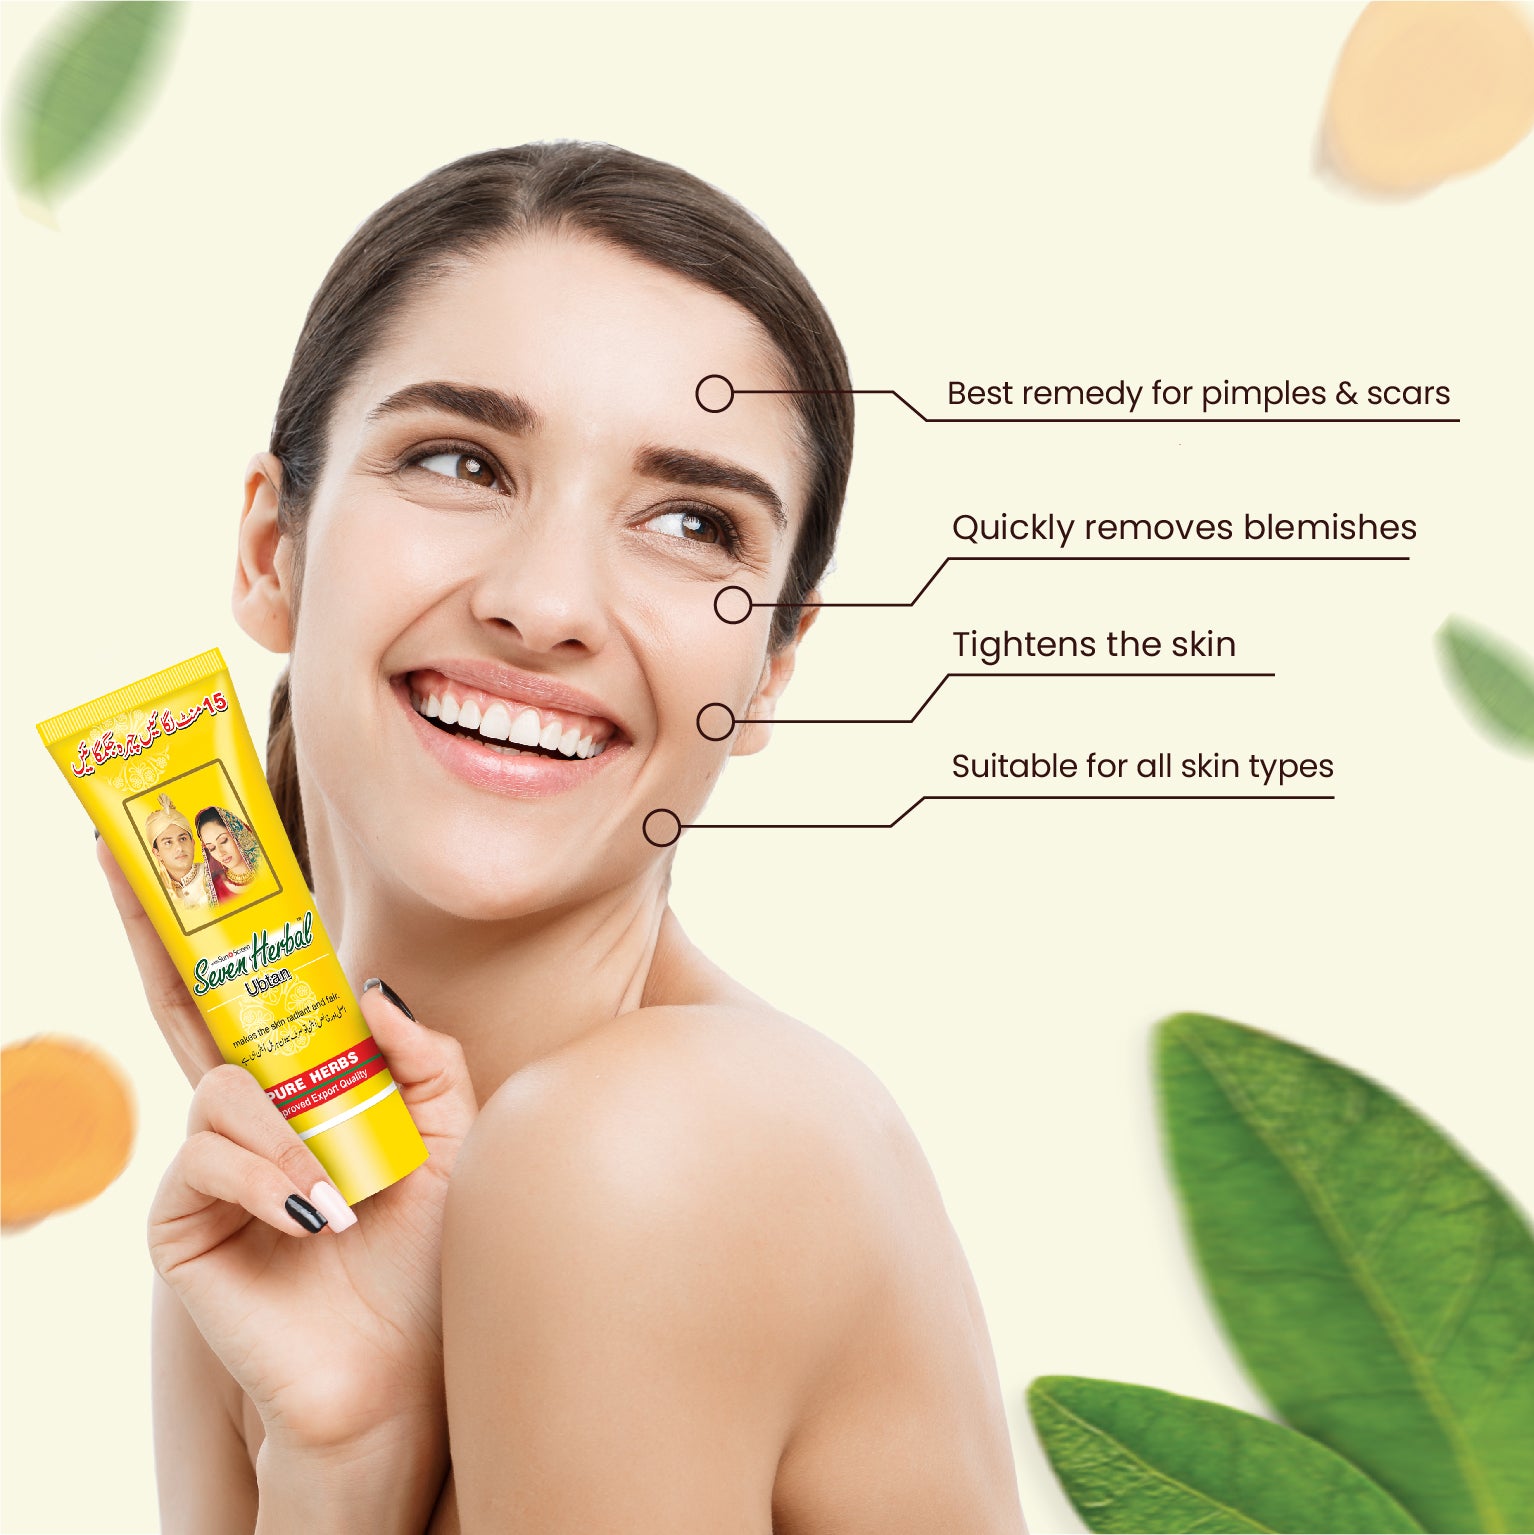 Seven Herbal ubtan is a blend of natural ingredients like Sandalwood, Honey, Turmeric, valerian herb, saffron, and Mallow extracts. All these ingredients are highly beneficial for improving skin texture and skin tone.